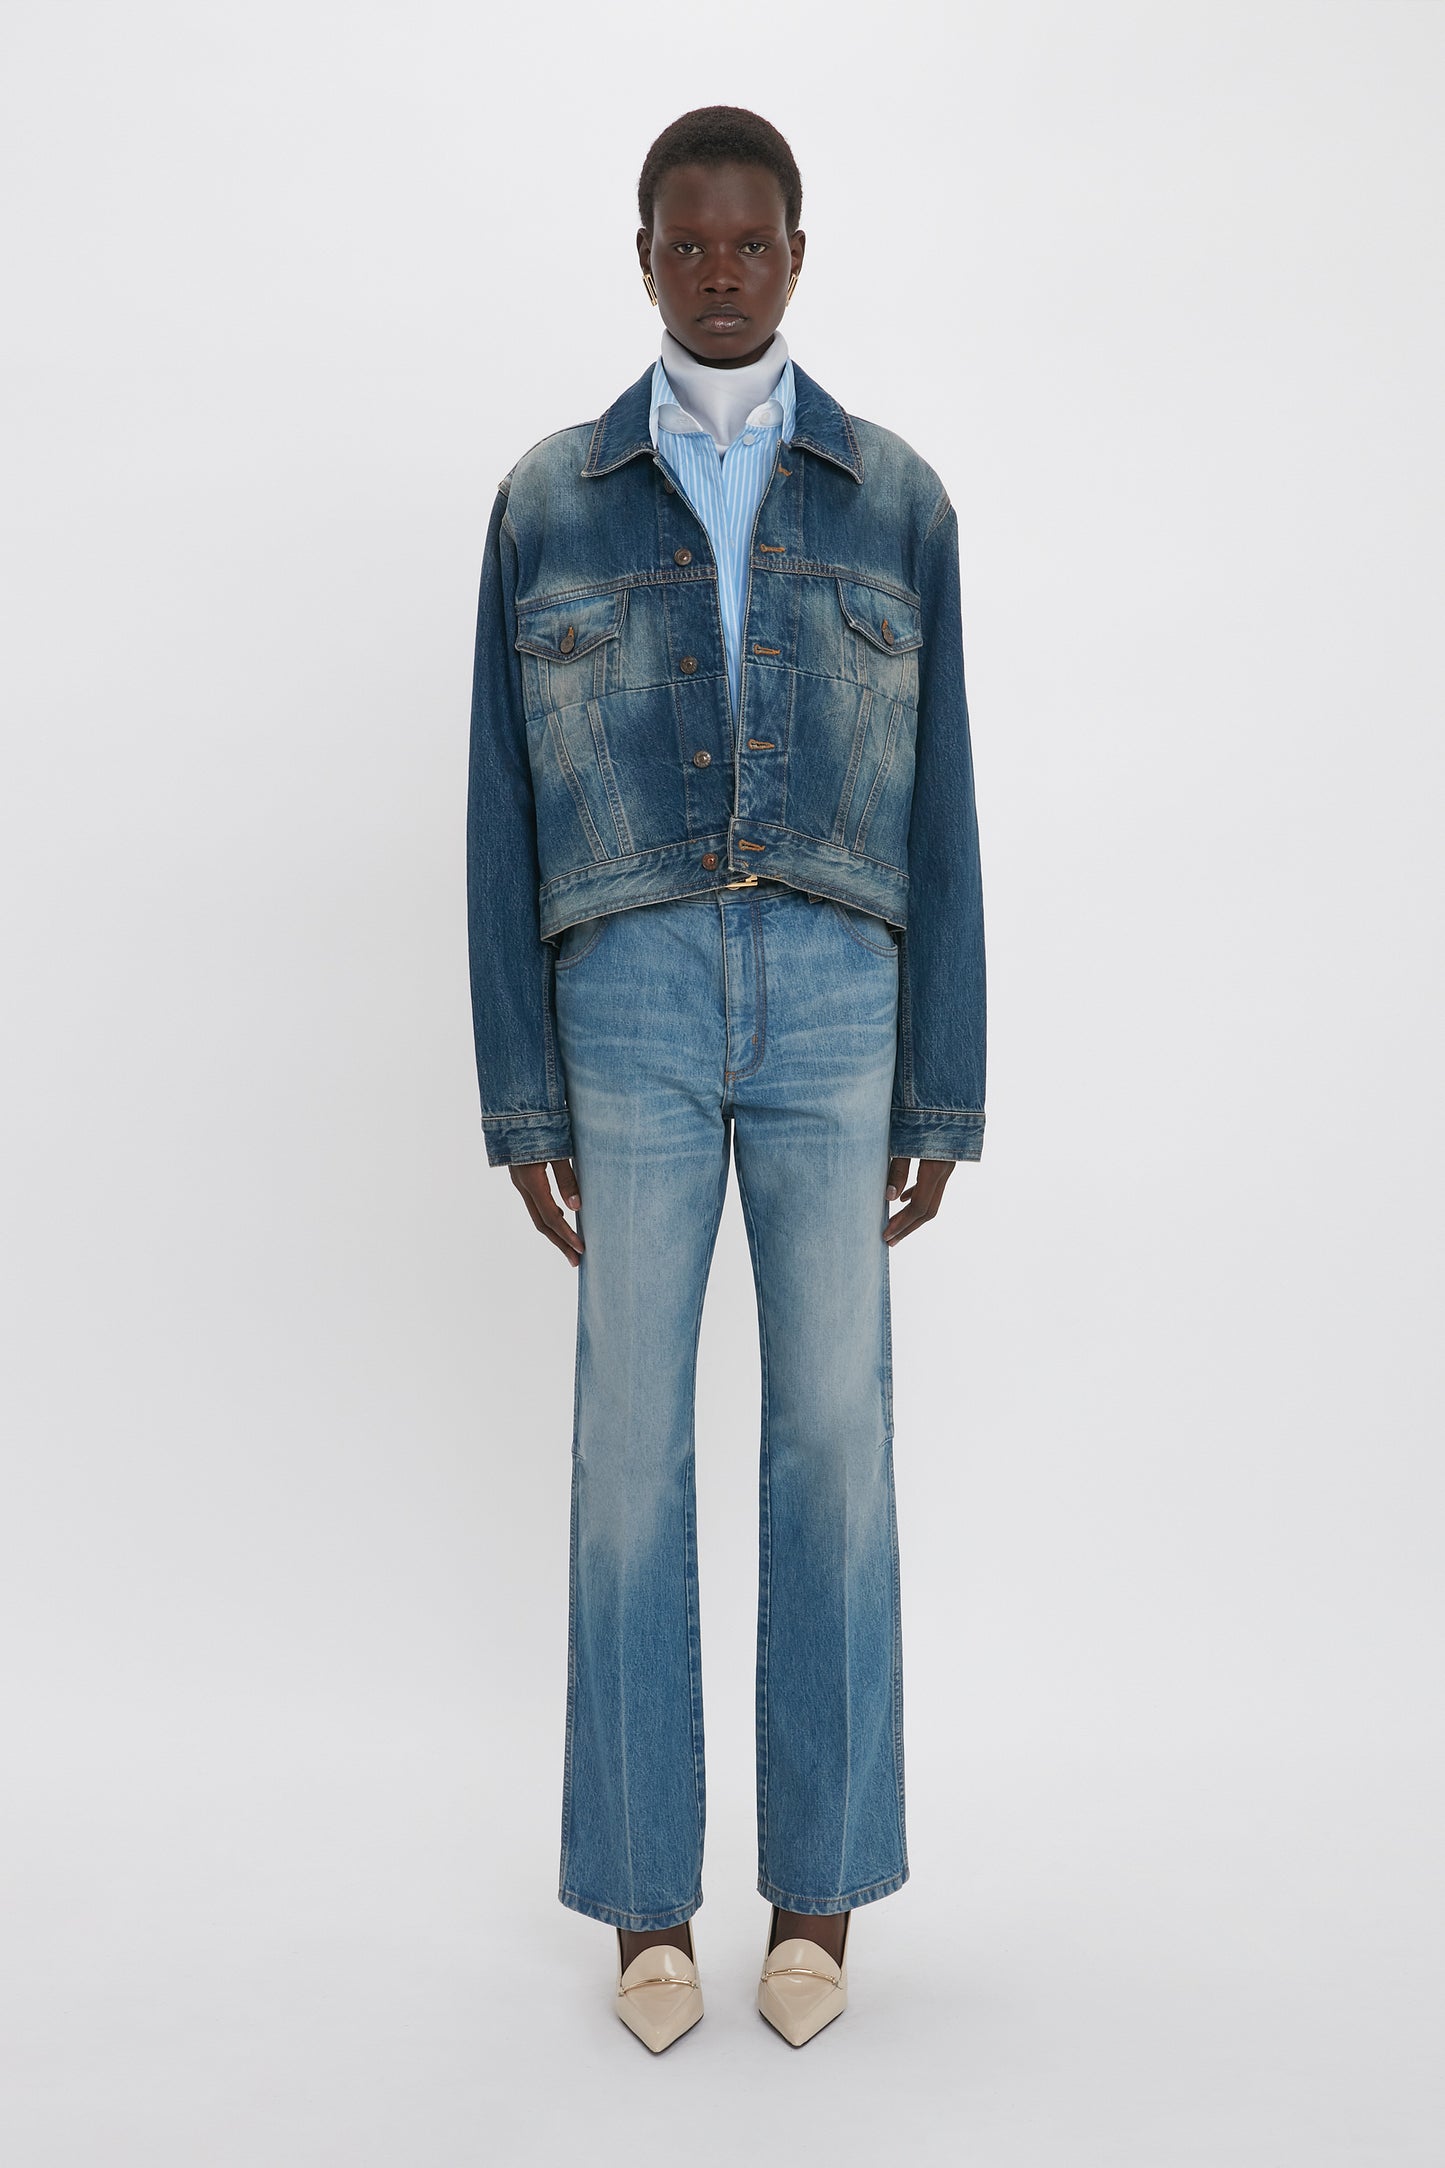 Person wearing a luxury Cropped Denim Jacket In Heavy Vintage Indigo Wash, blue and white striped shirt, blue jeans, and beige pointed shoes stands against a plain white background, embodying the chic style of Victoria Beckham.